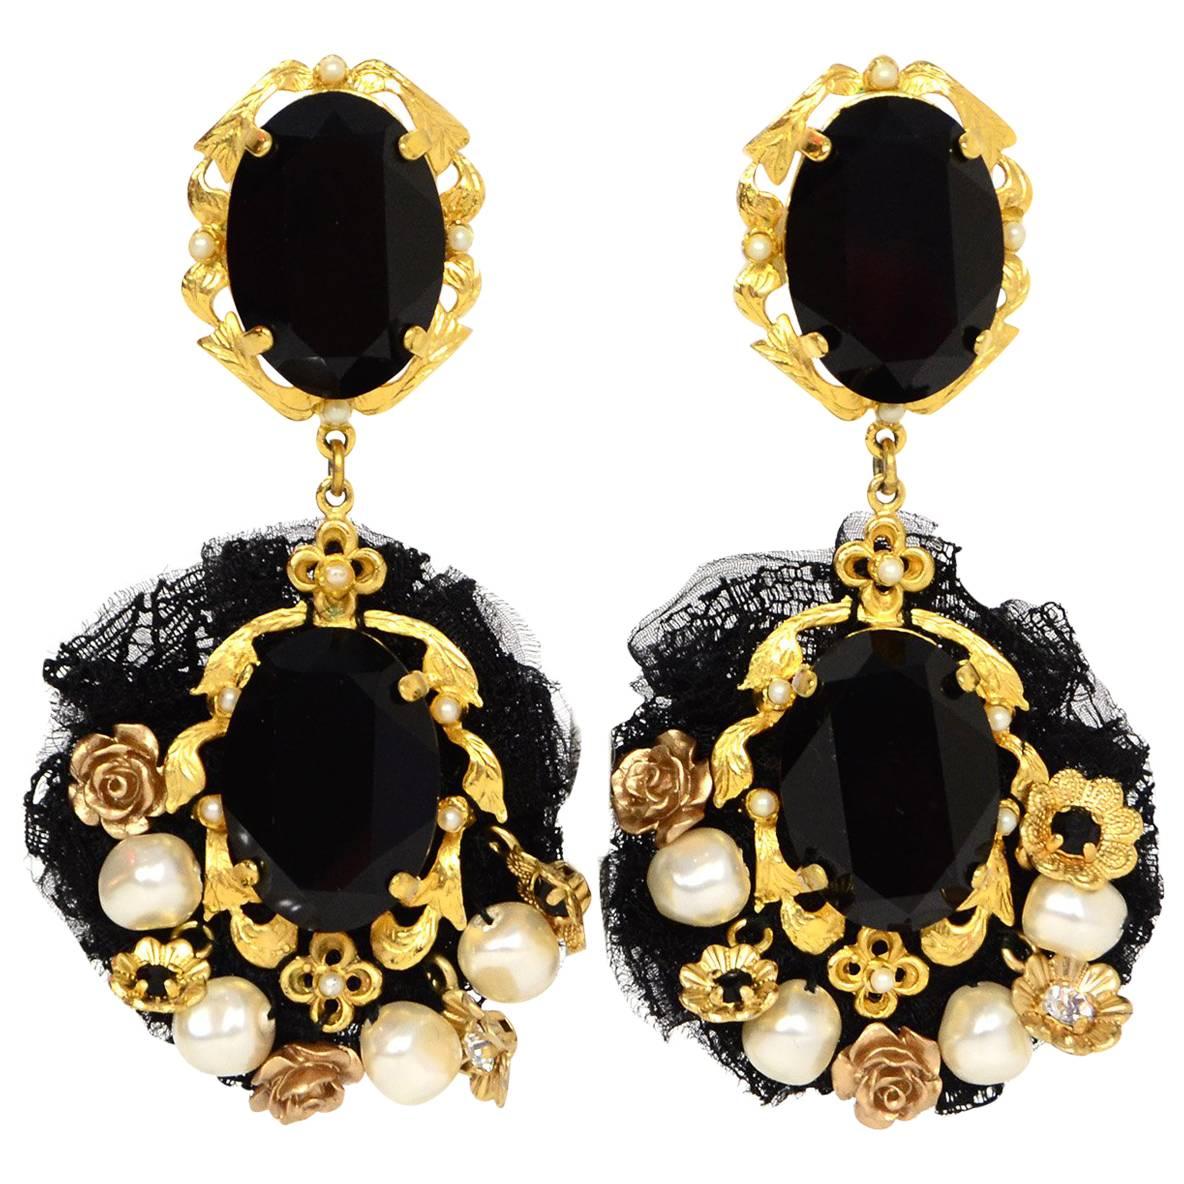 Dolce & Gabbana Black Lace & Crystal Embellished Clip On Earrings